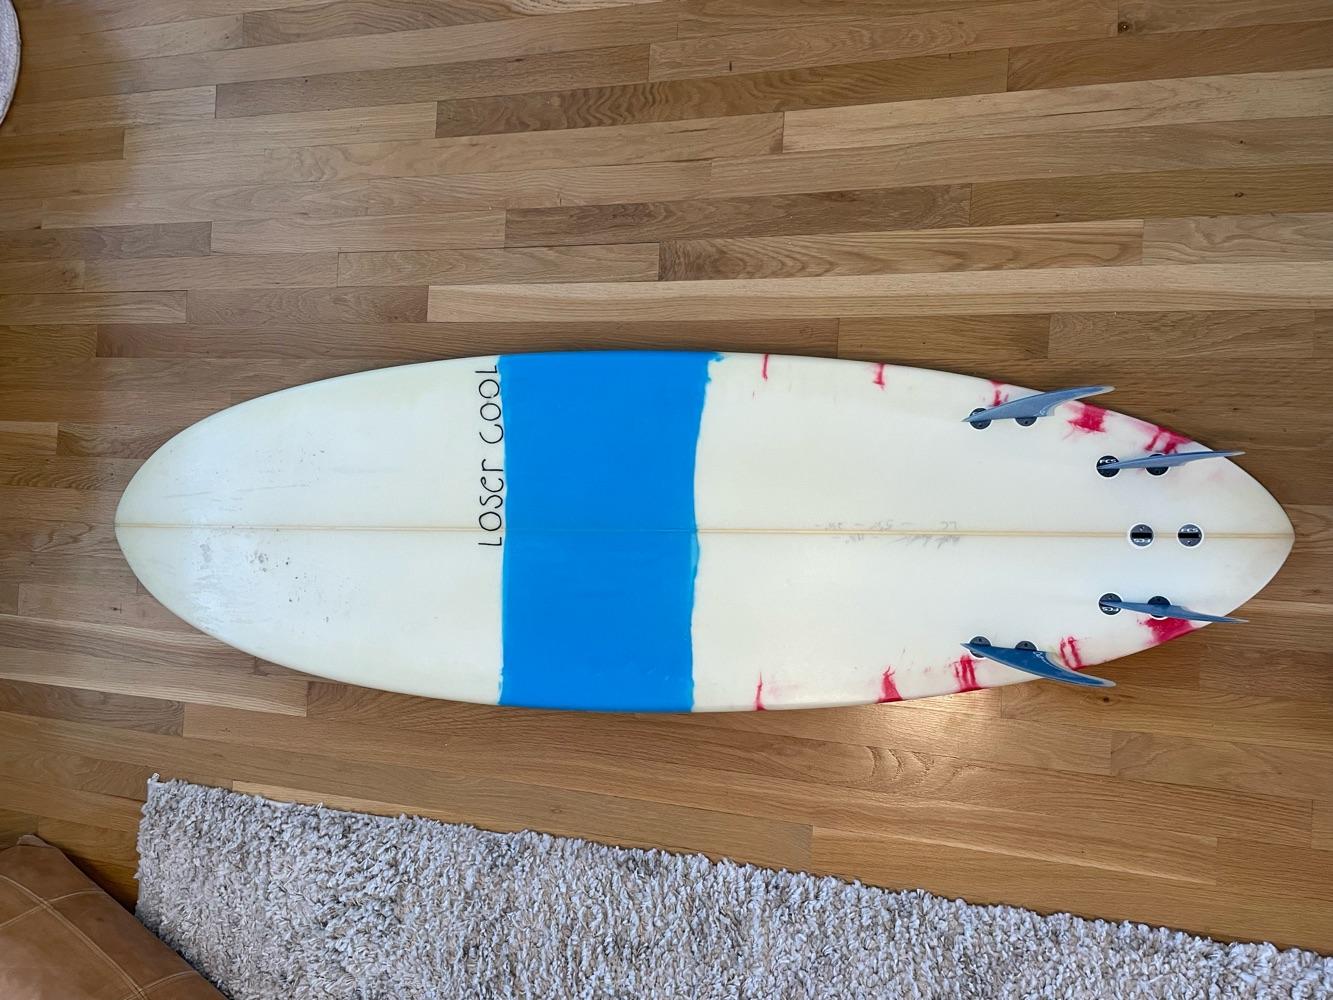 5’10” Surfboard for Sale